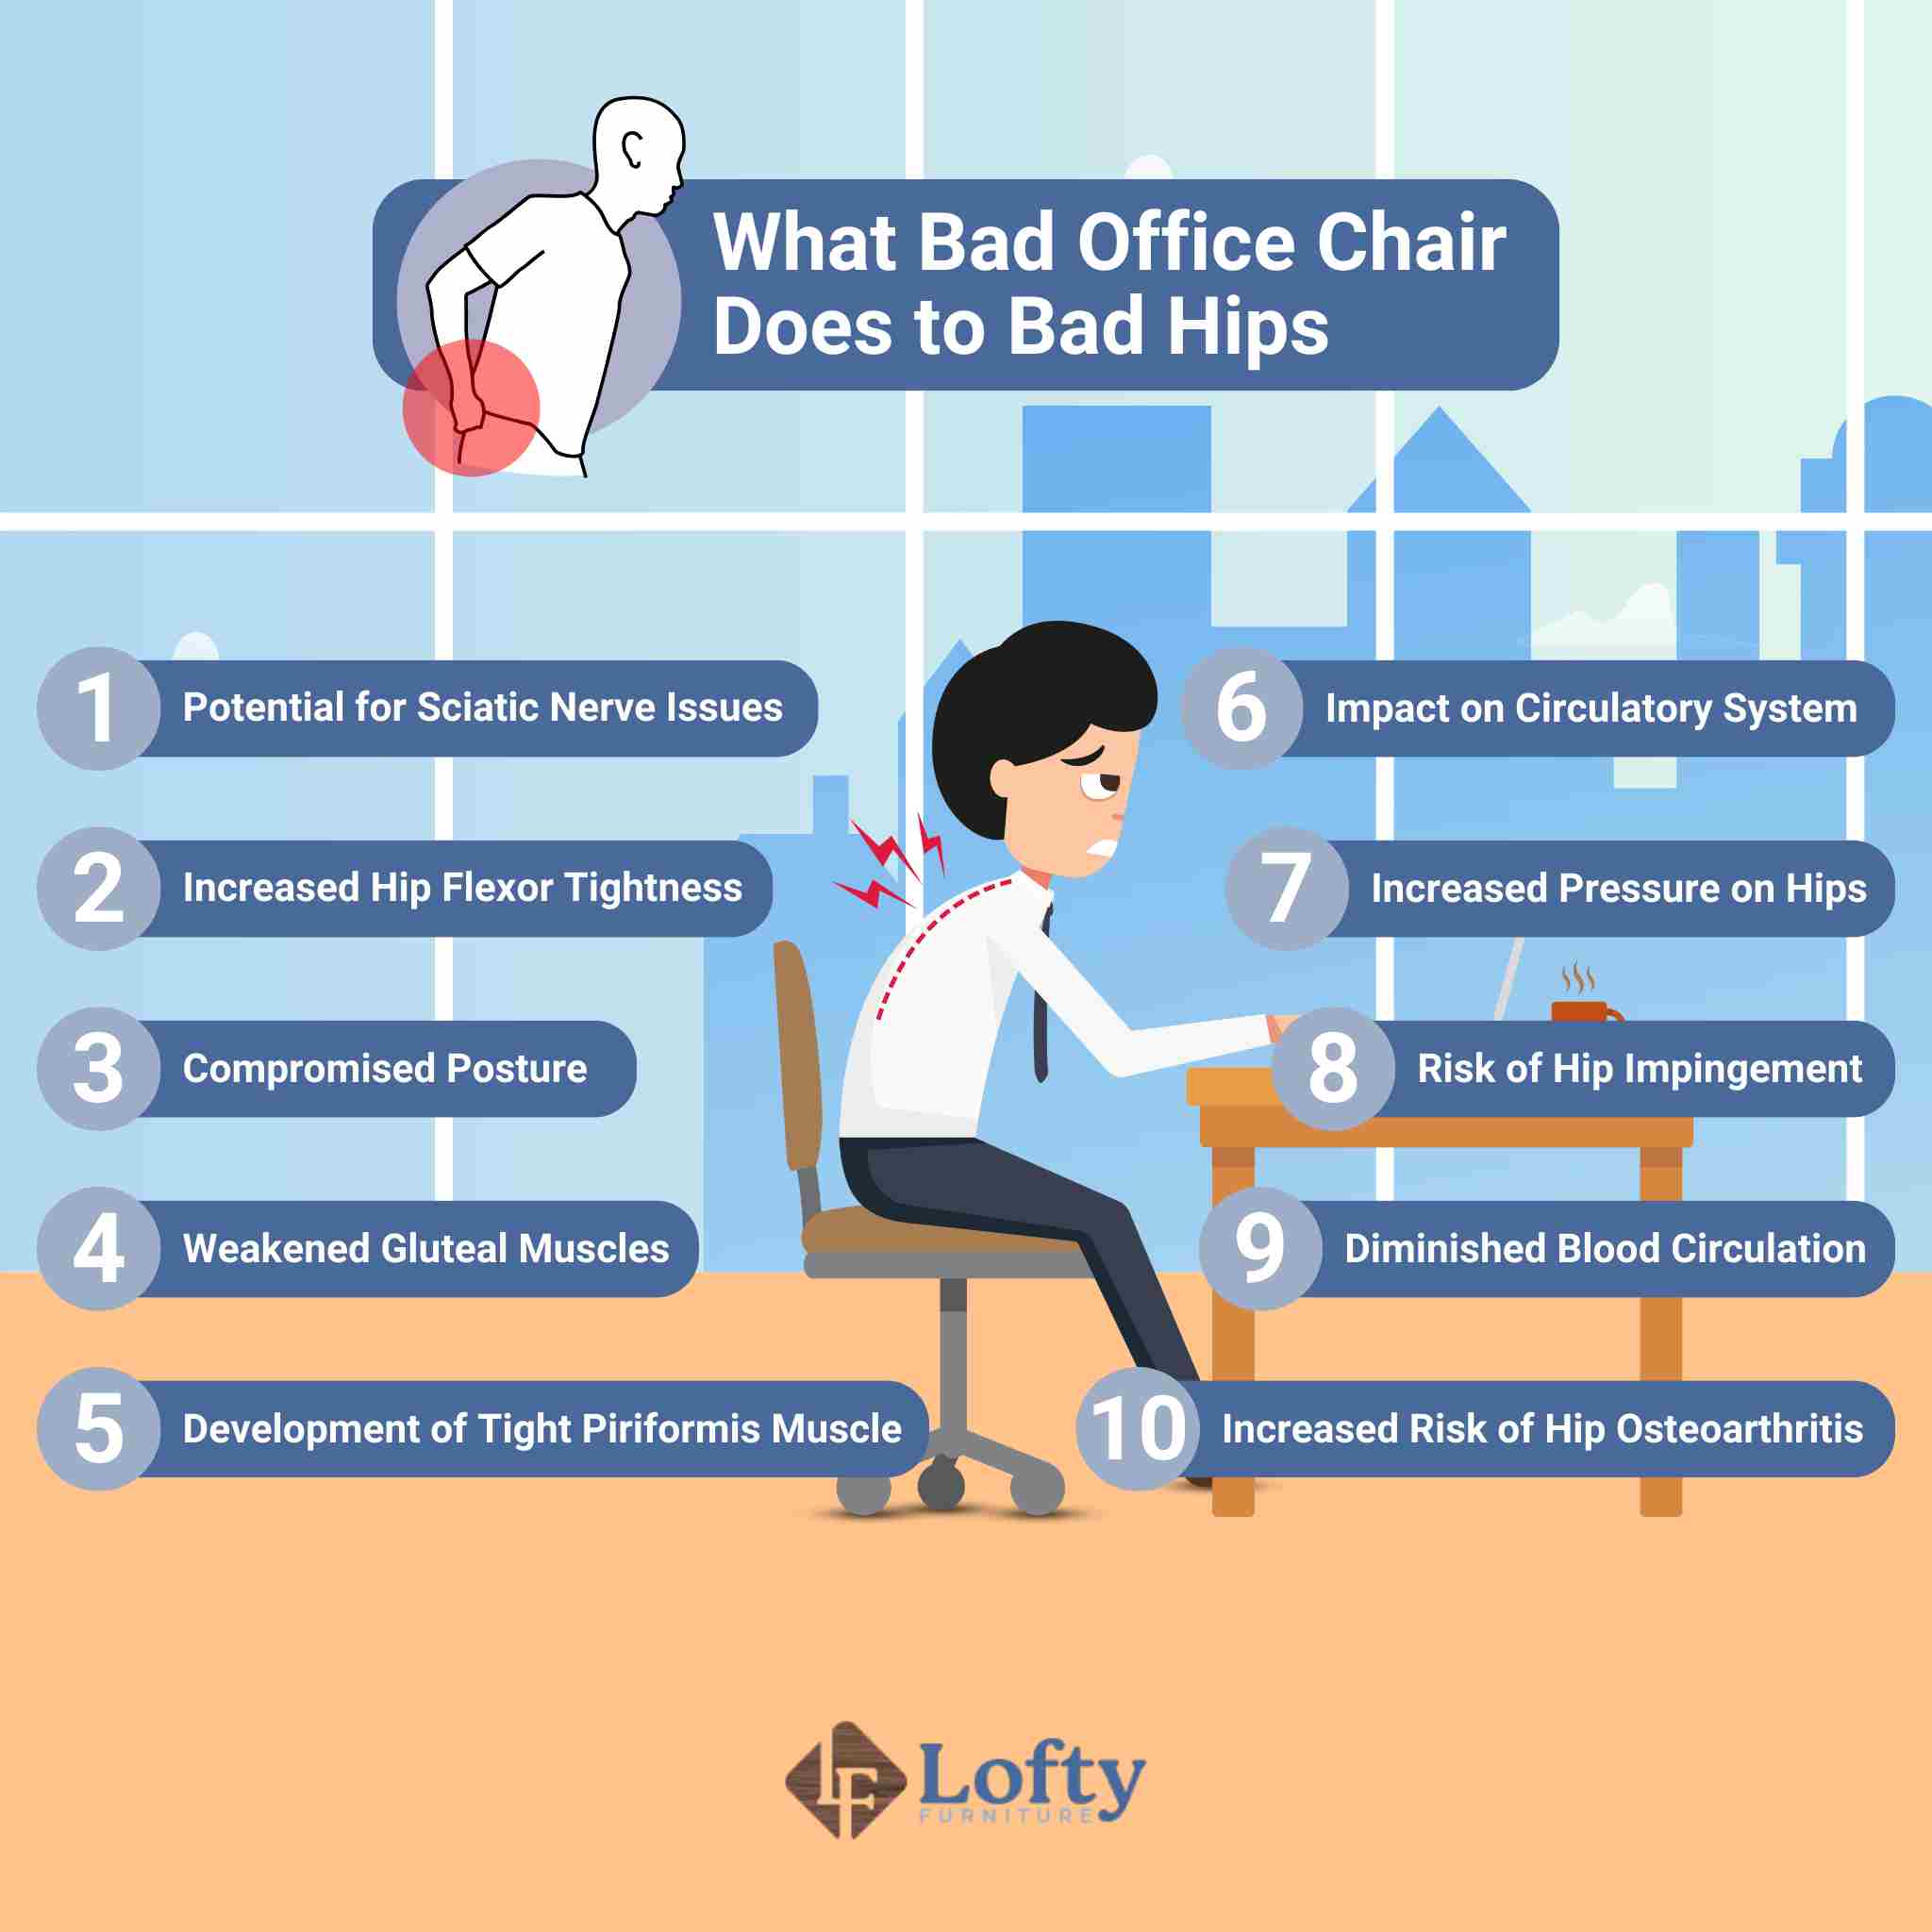 An illustration on what bad office chair does to bad hips.